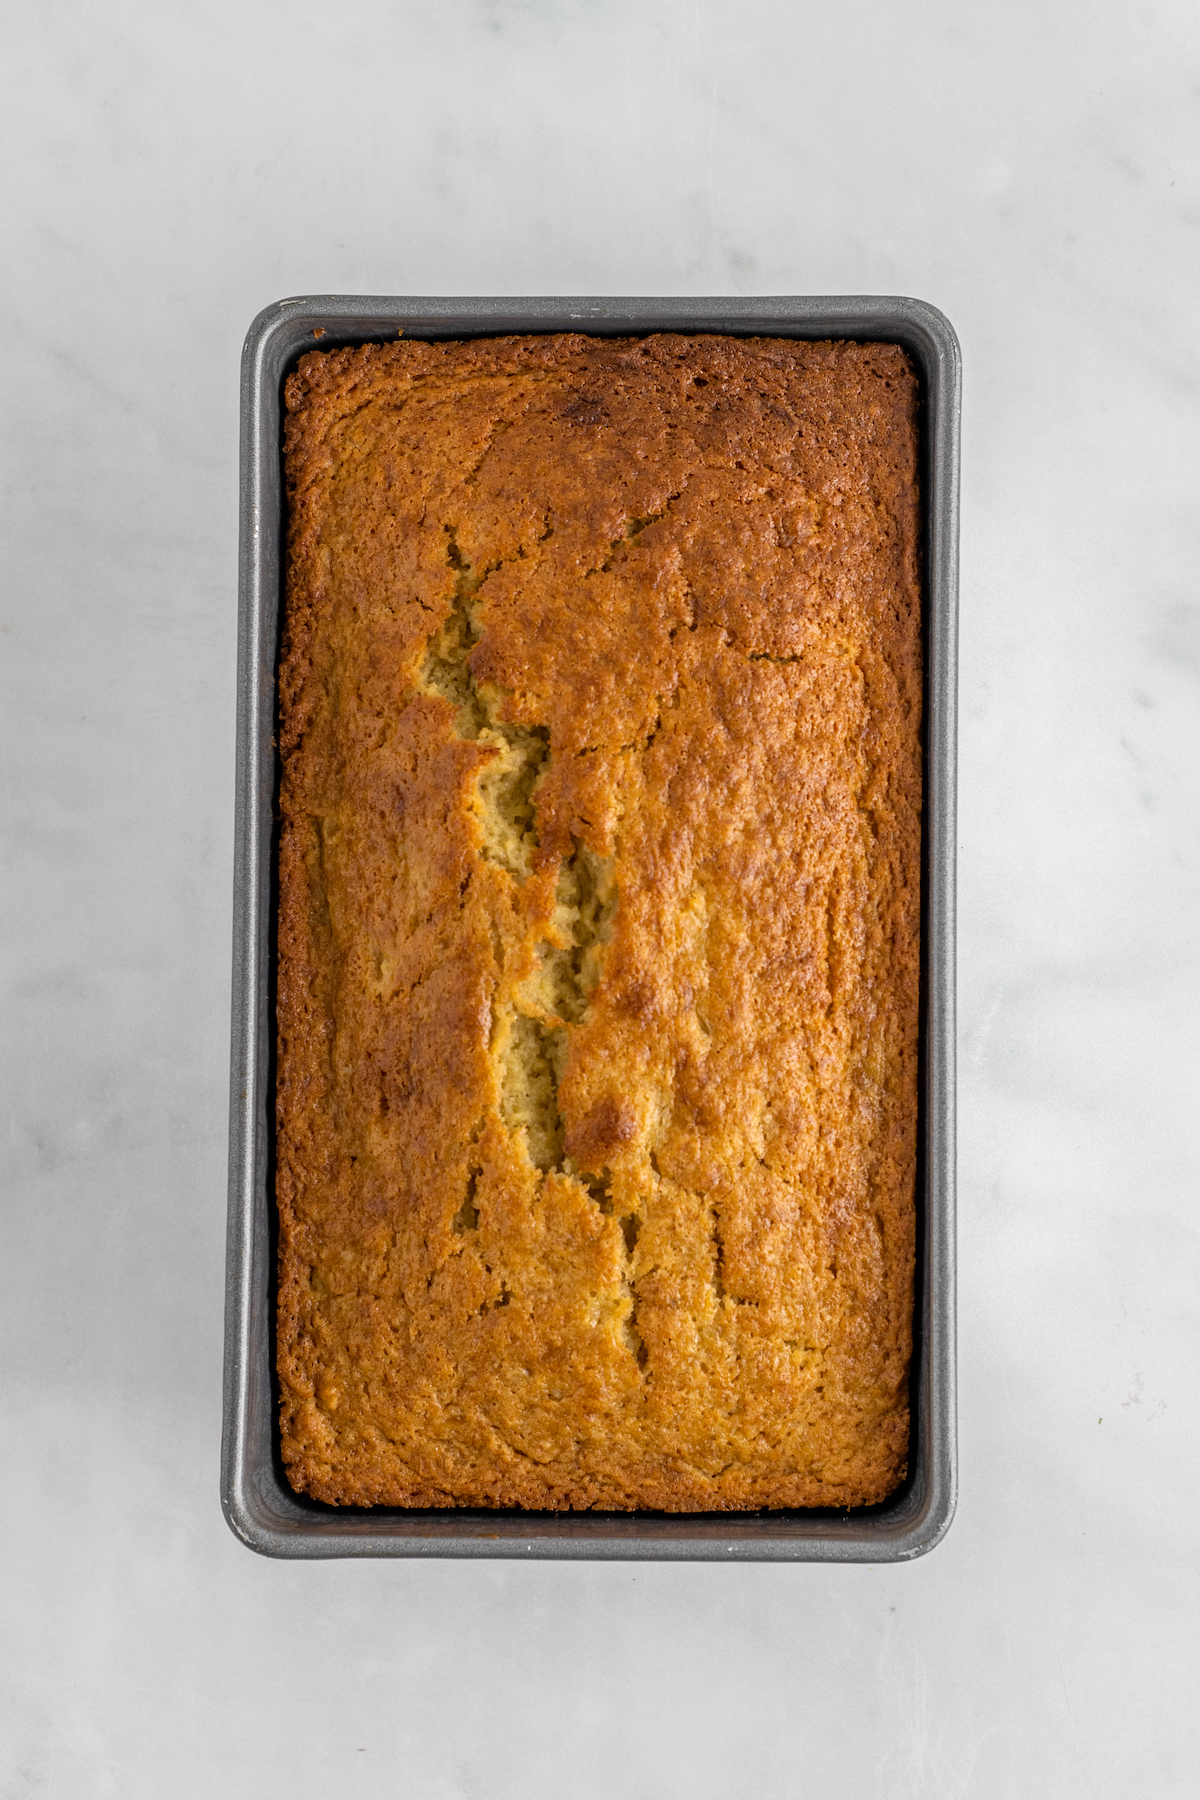 A baked quick bread loaf in a pan.